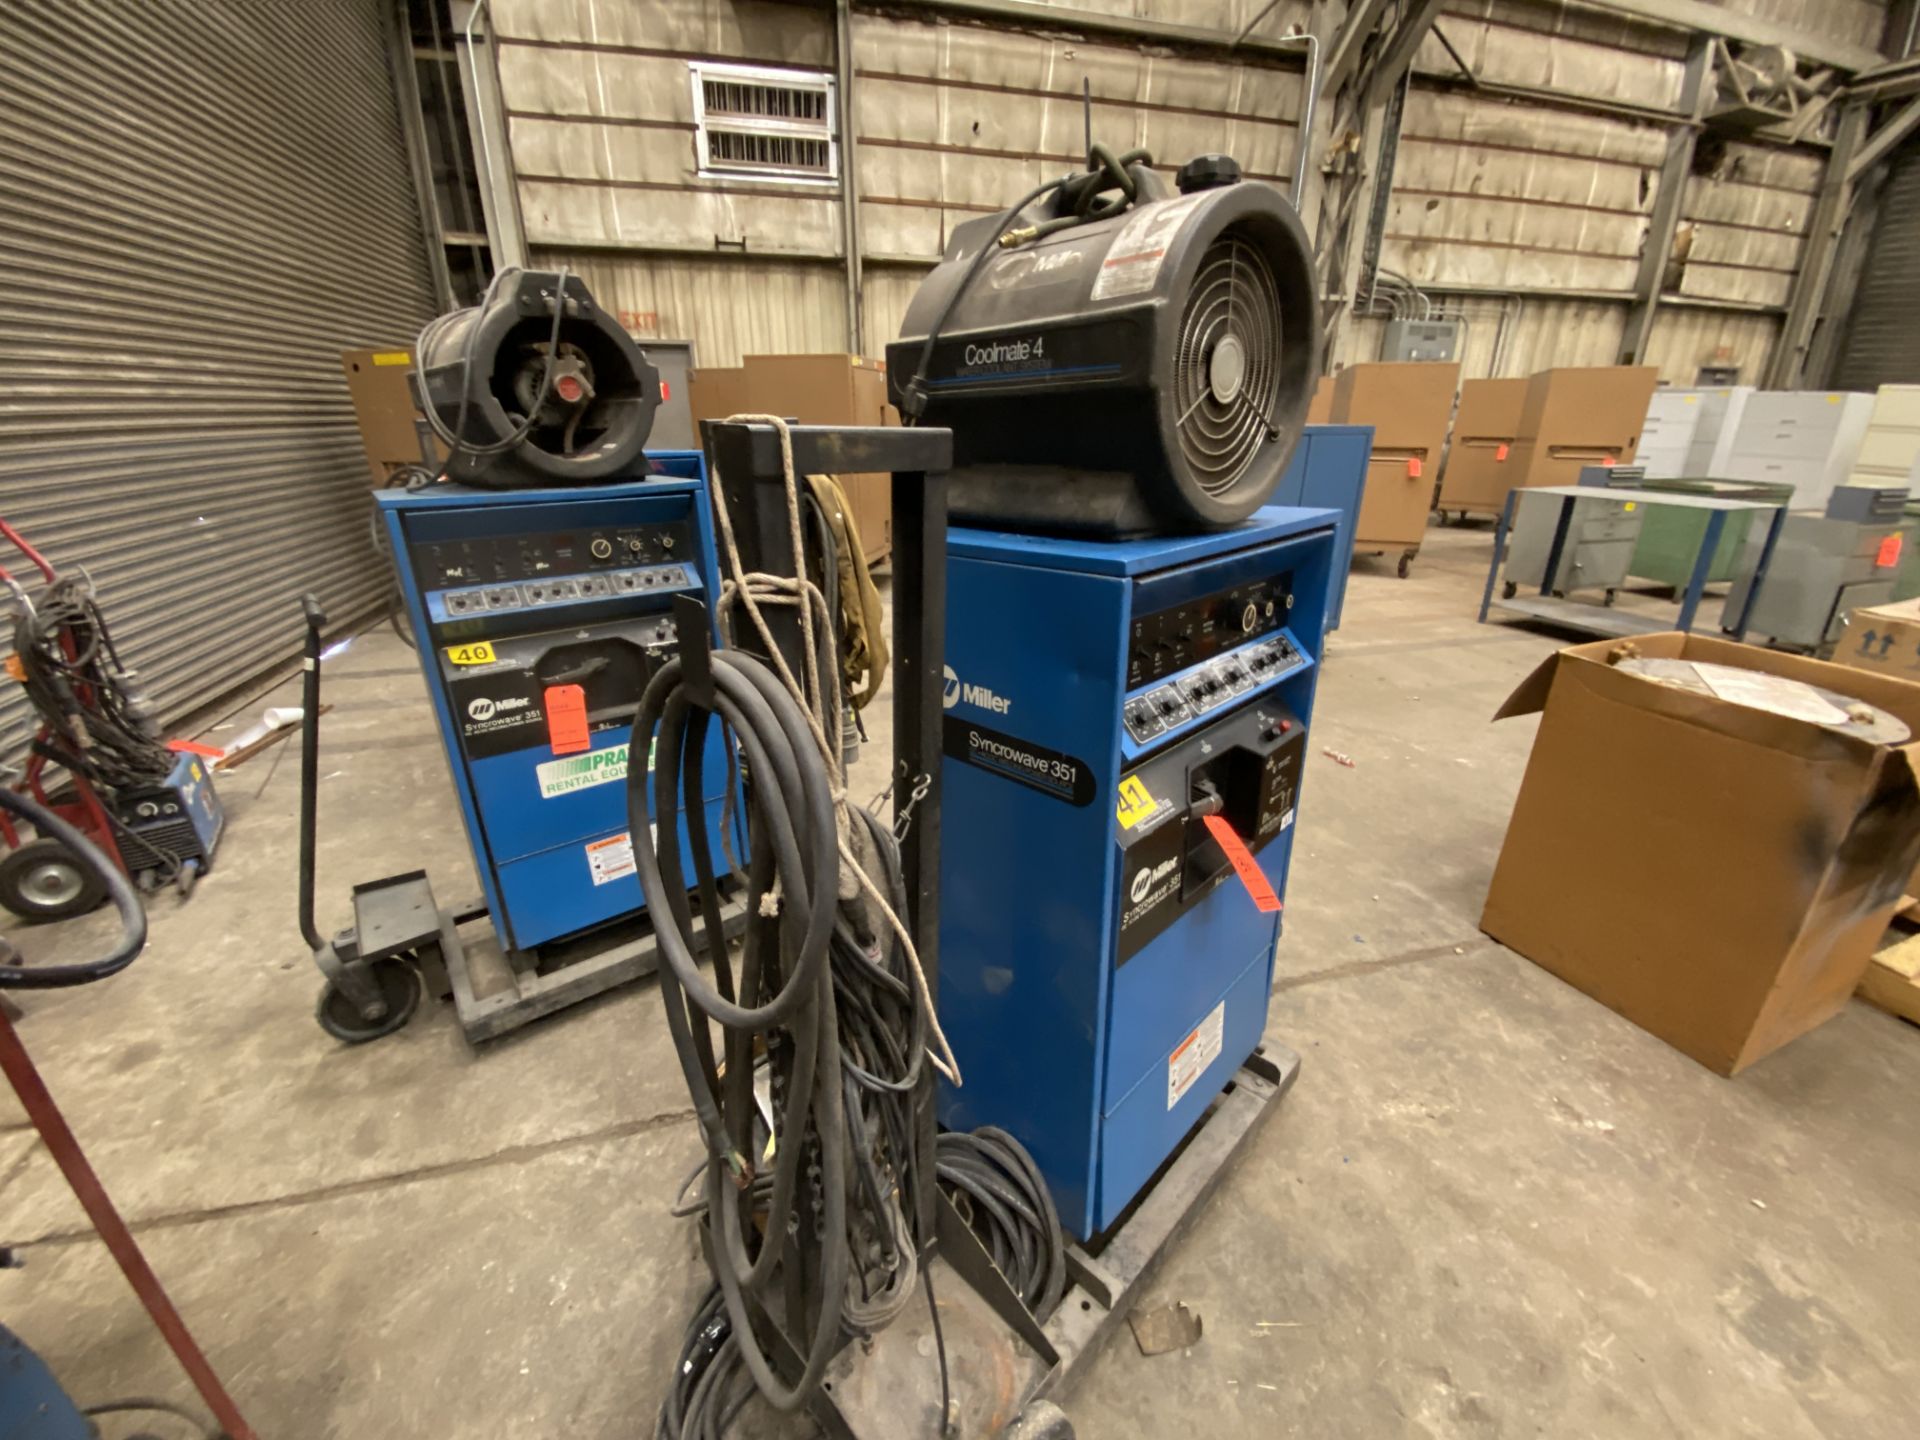 Miller synchrowave 351 CC ac/DC arc welder SN KH316086 with Coolmate 4 water chiller with foot - Image 4 of 4